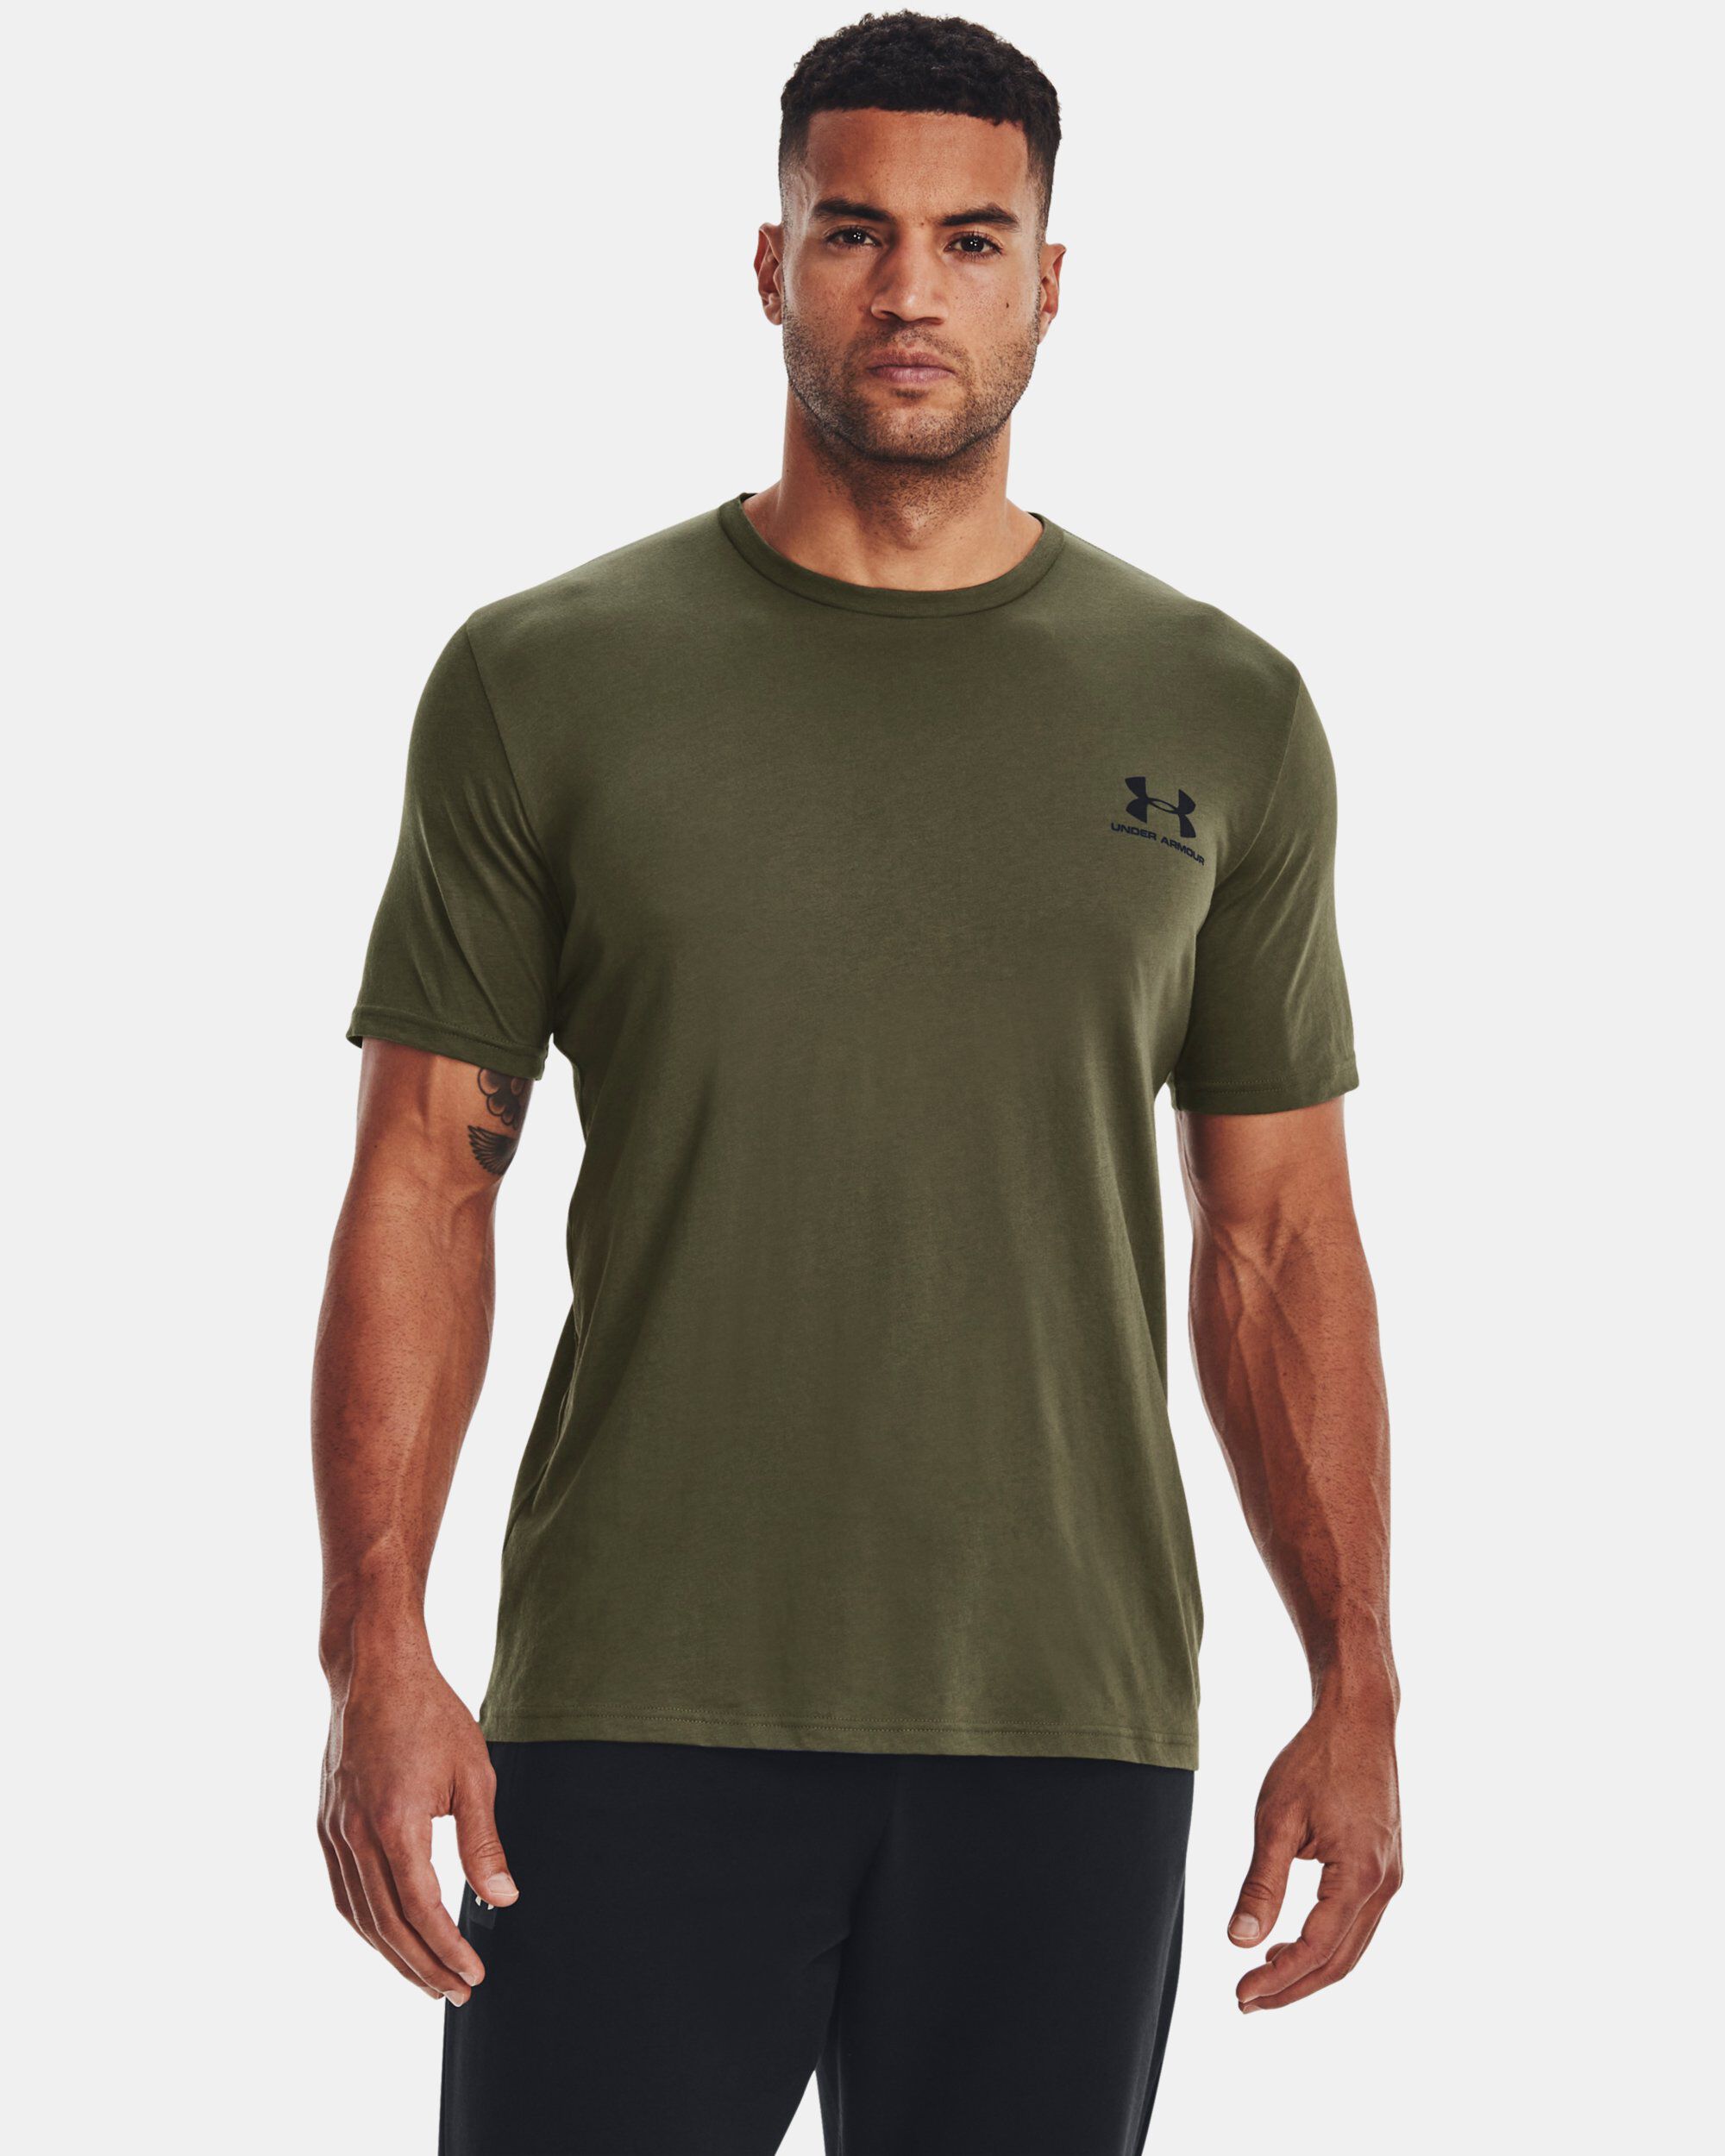 Under Armour New Collections in Dubai, UAE | Buy Online